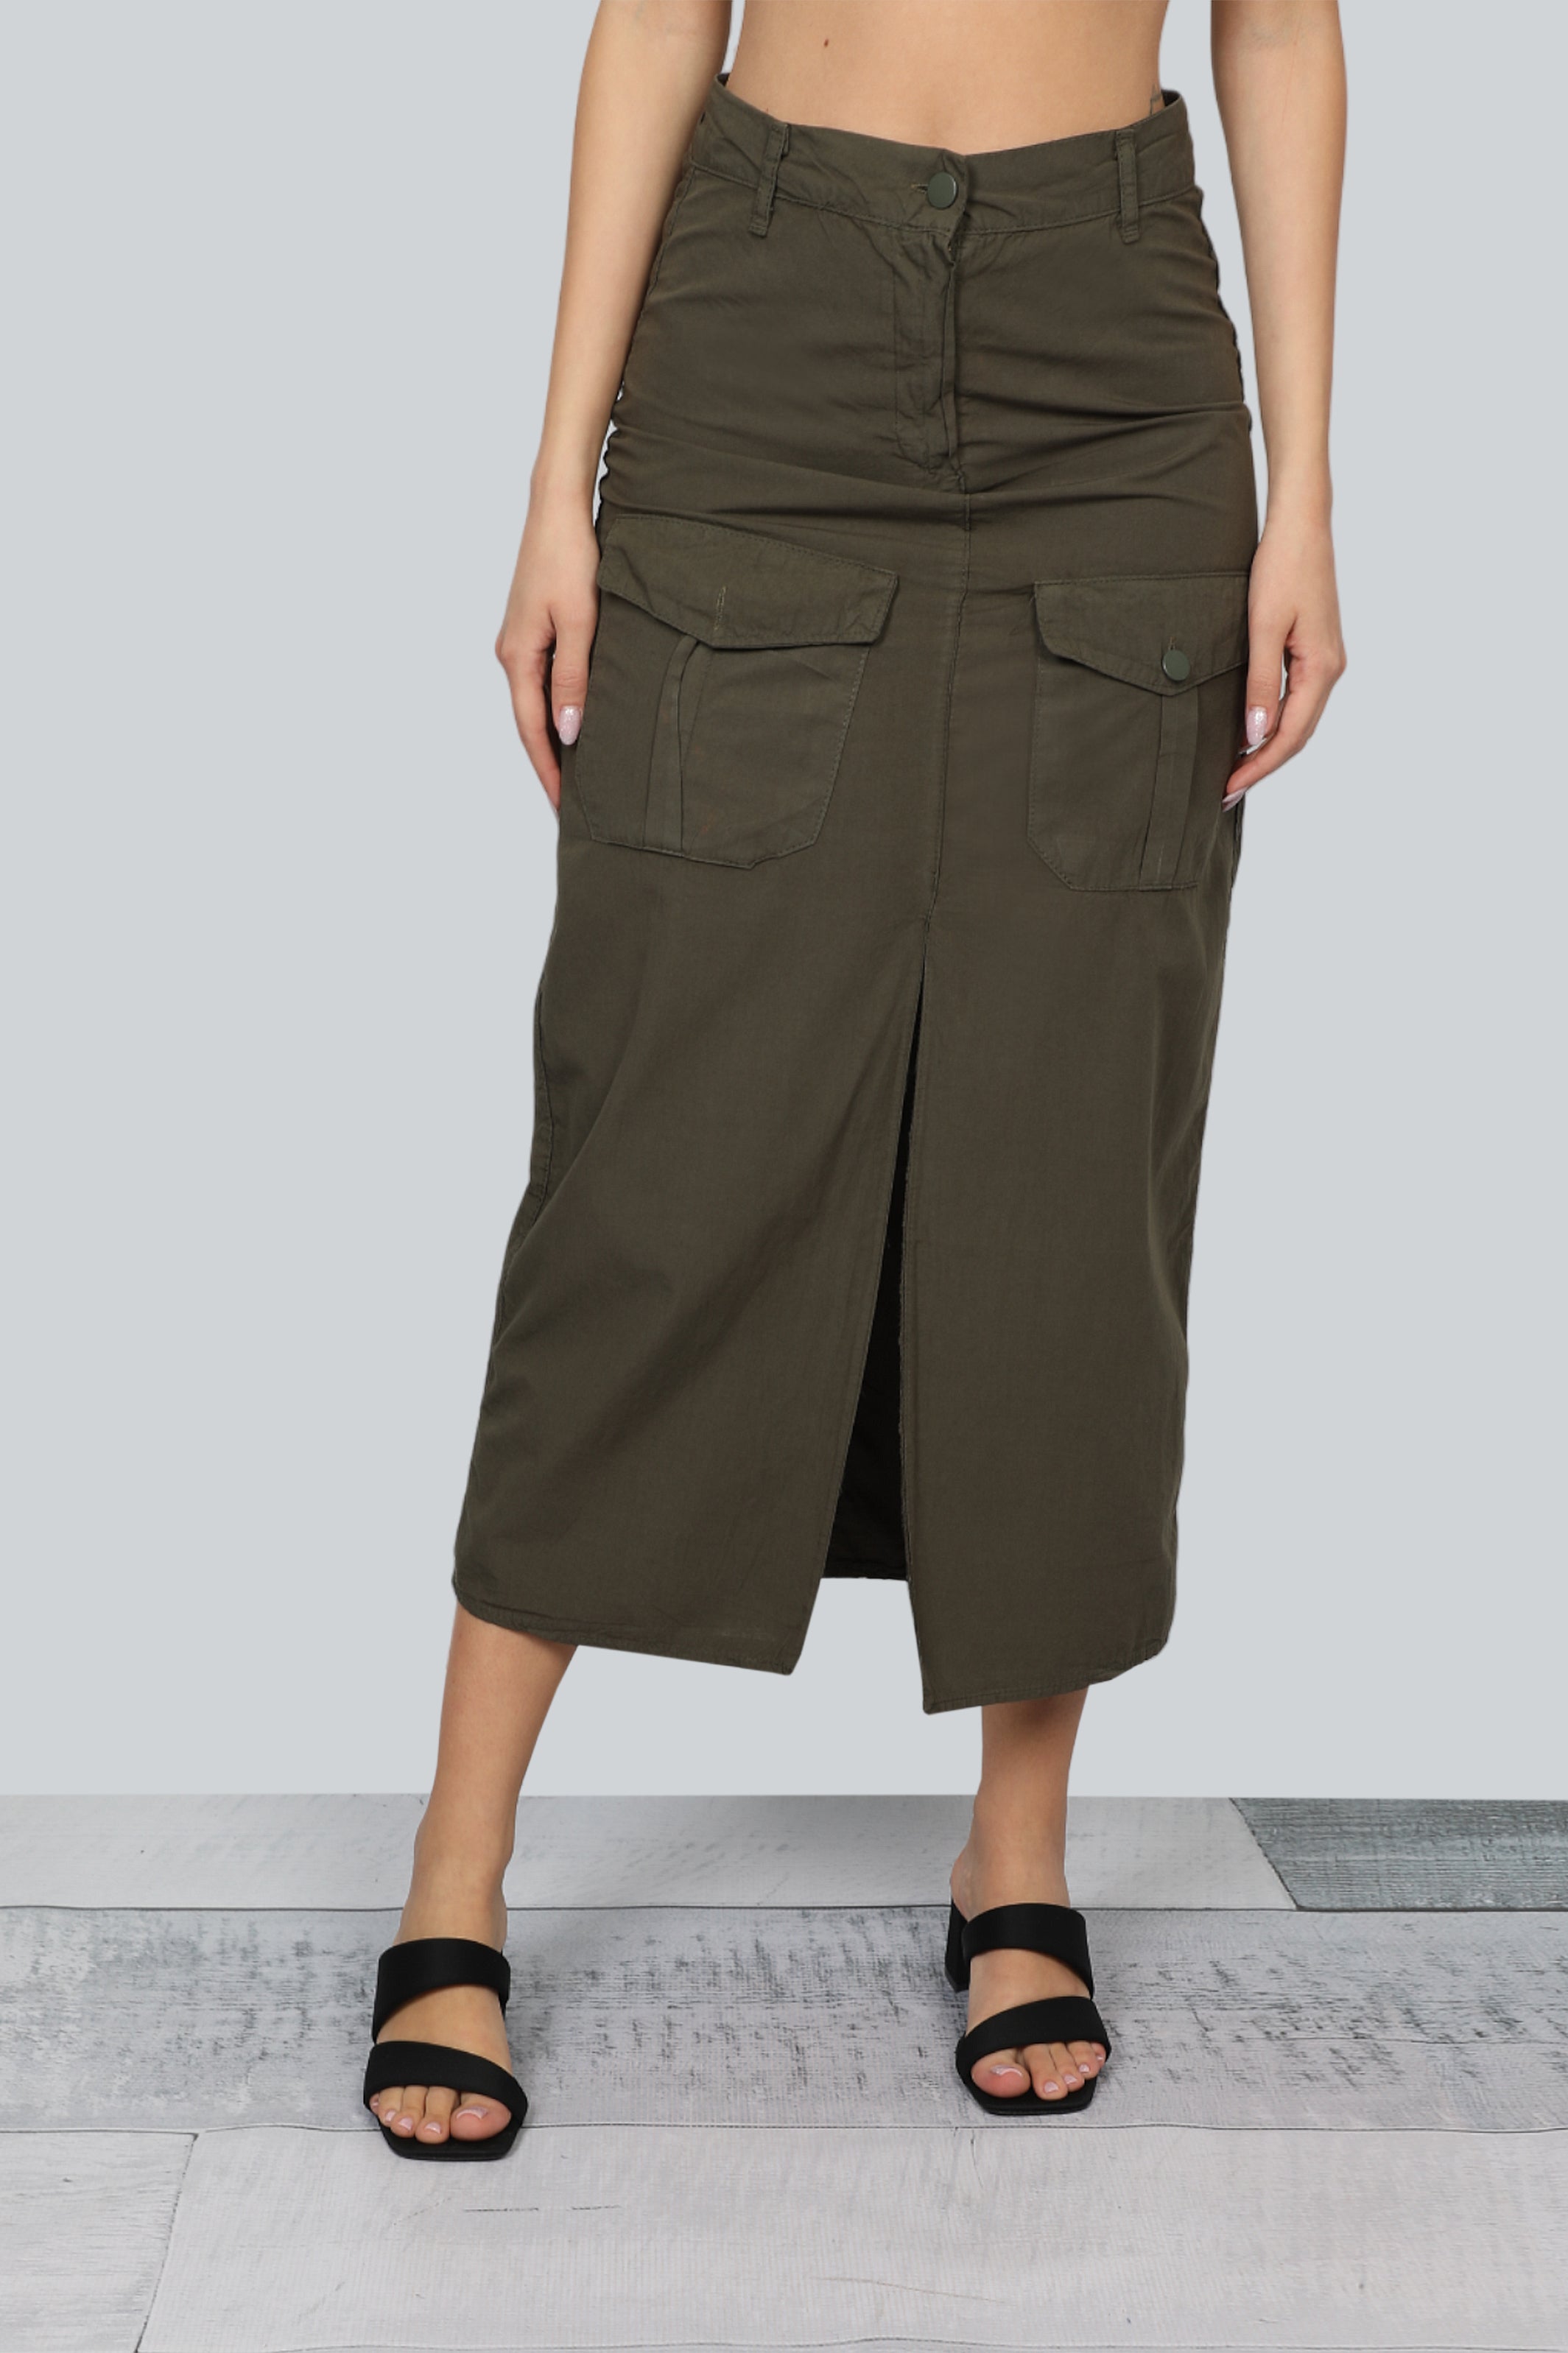 Olive Long Casual Skirt With Pockets